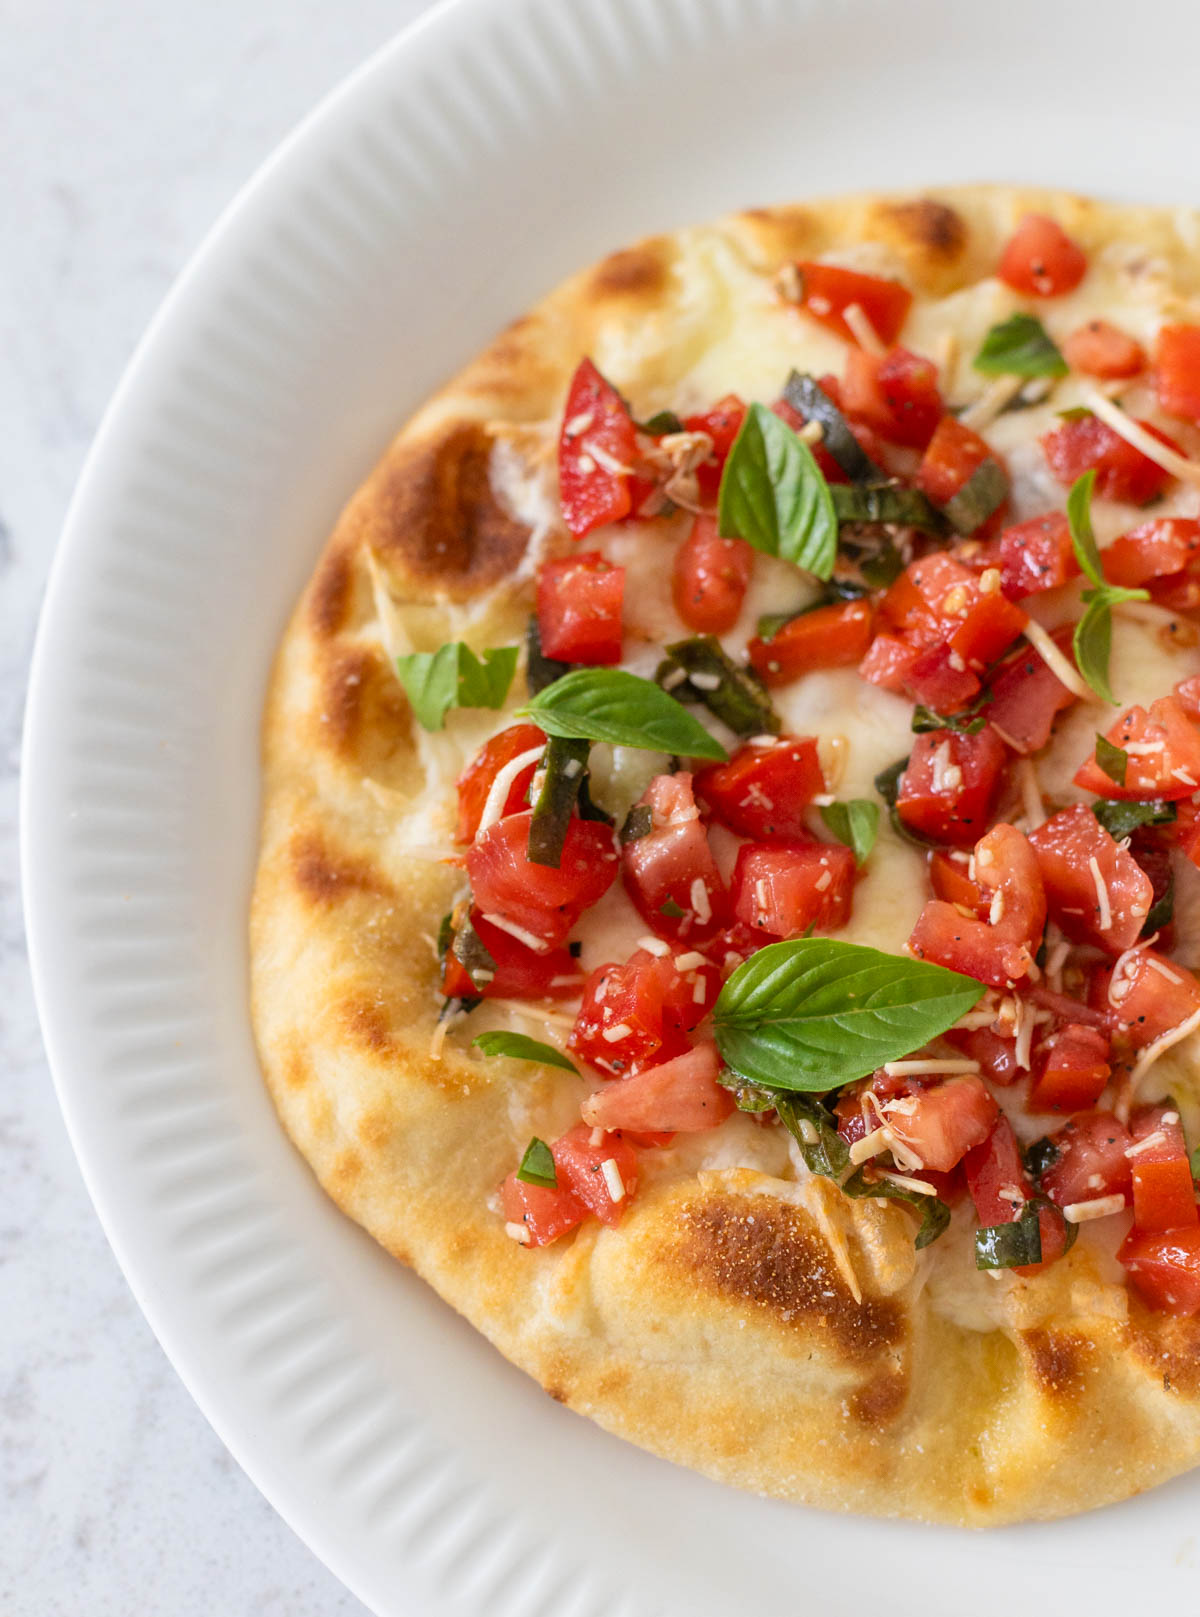 The bruschetta pizza is ready to be served with the fresh tomatoes and basil on top of the prepared naan bread.